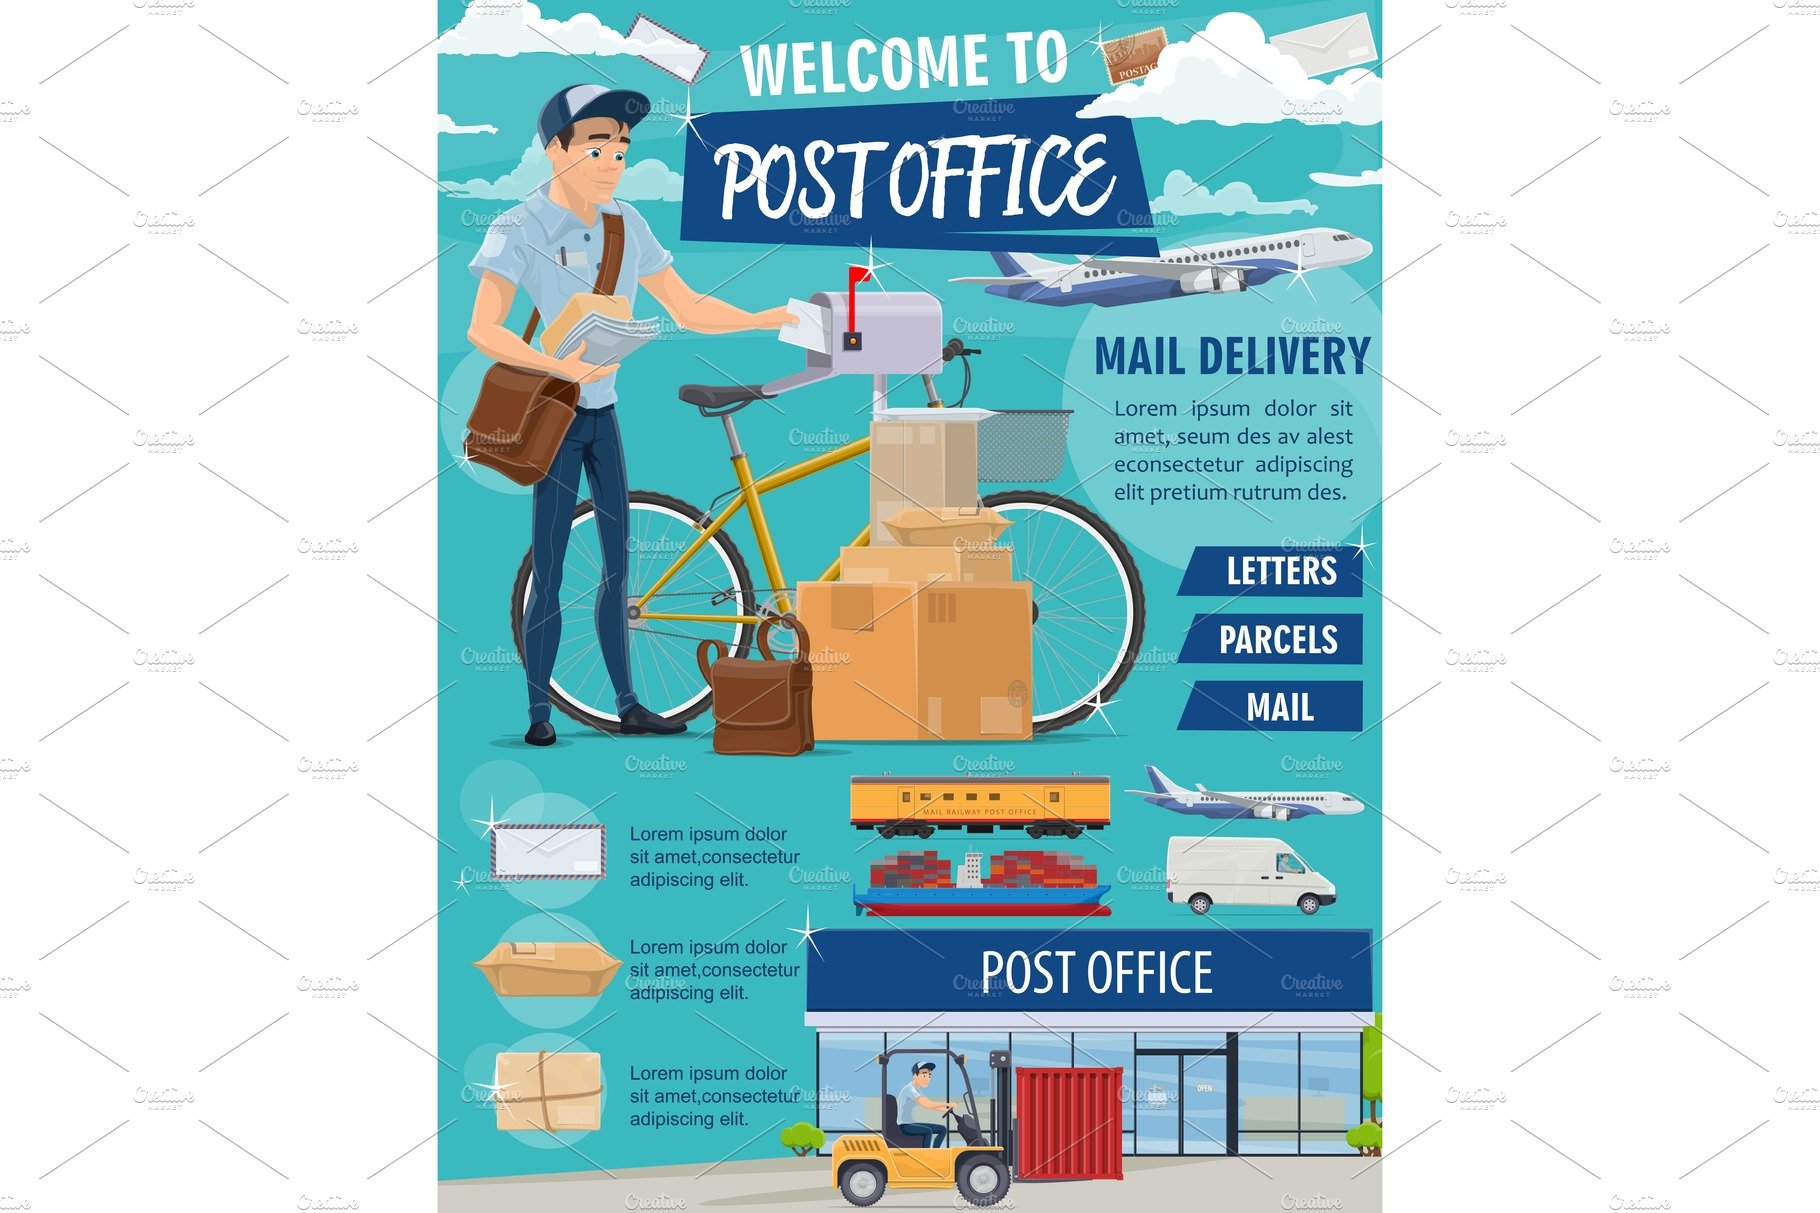 Post office, mailman cover image.